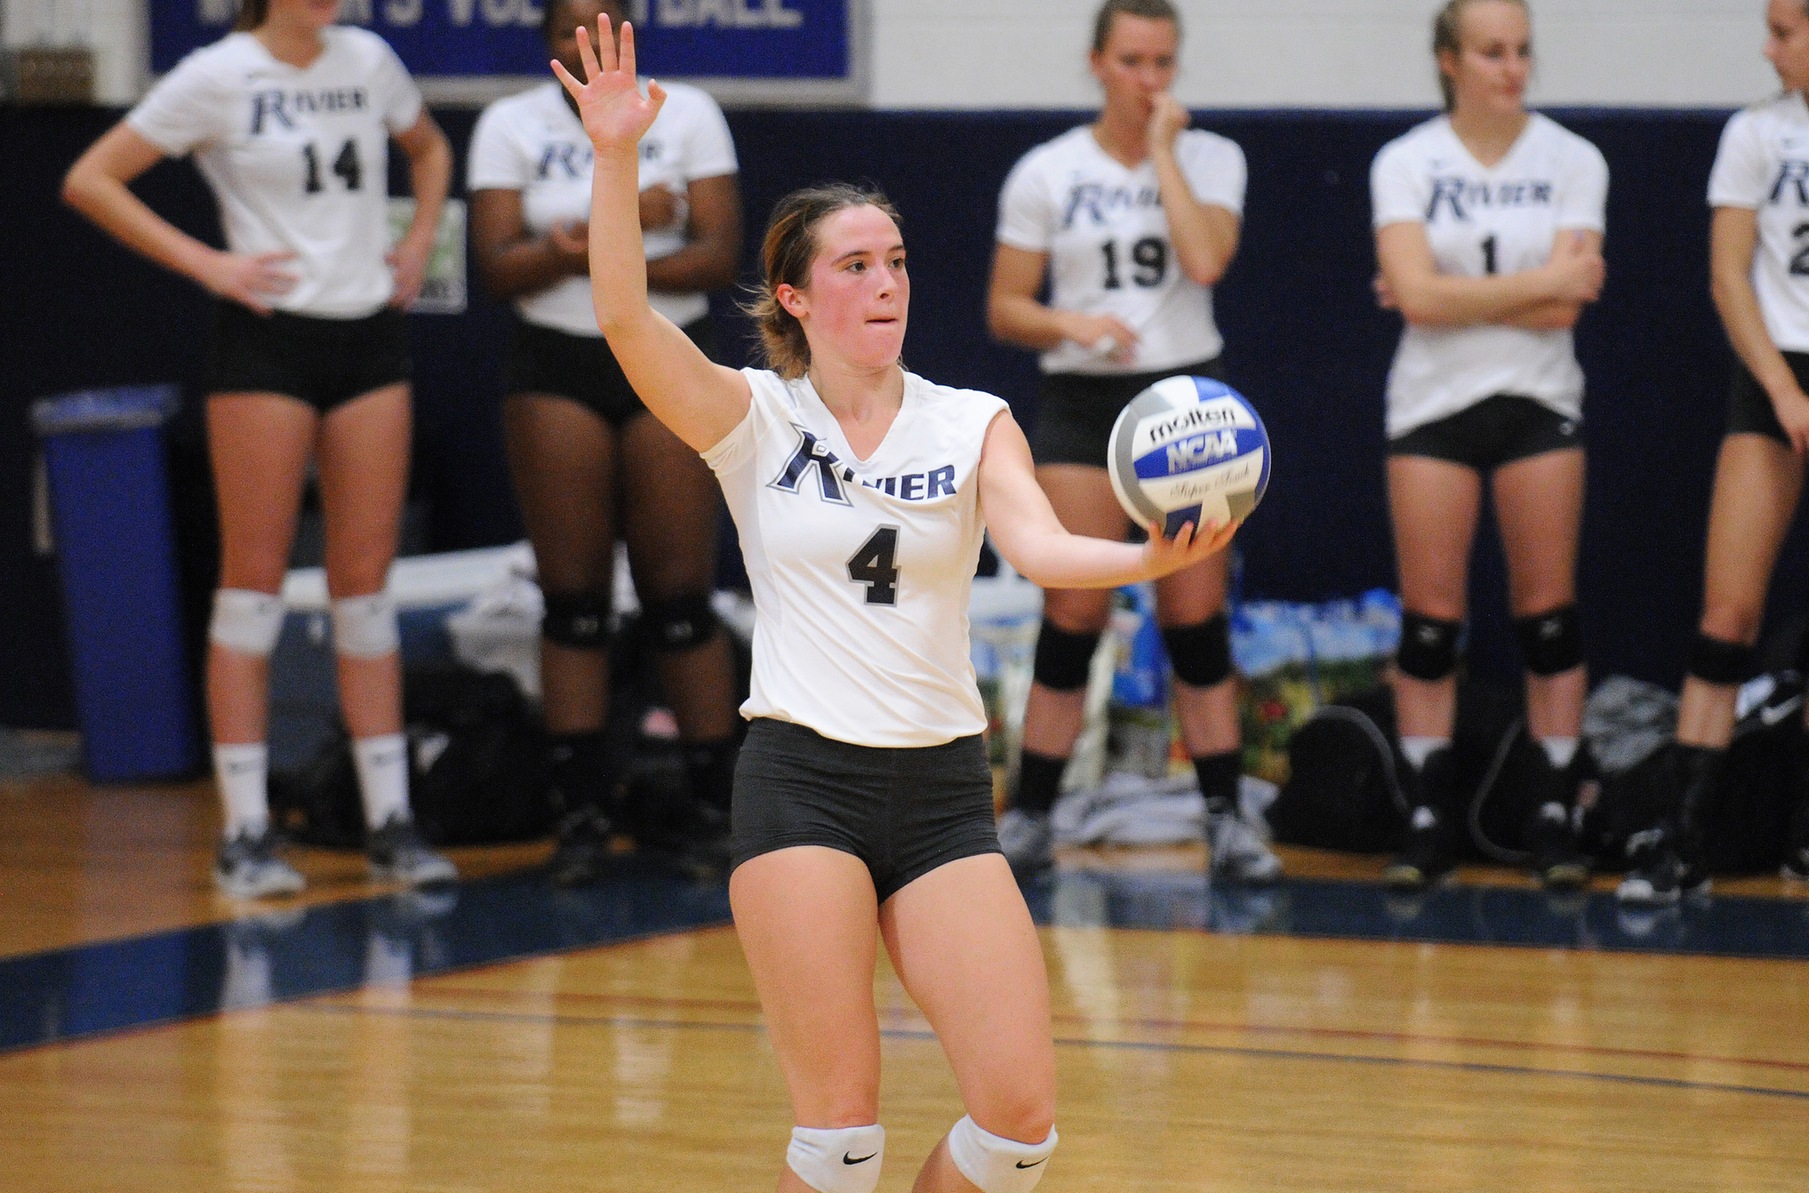 Women's Volleyball: Dunster's 18-kill effort leads Raiders past Lions 3-0